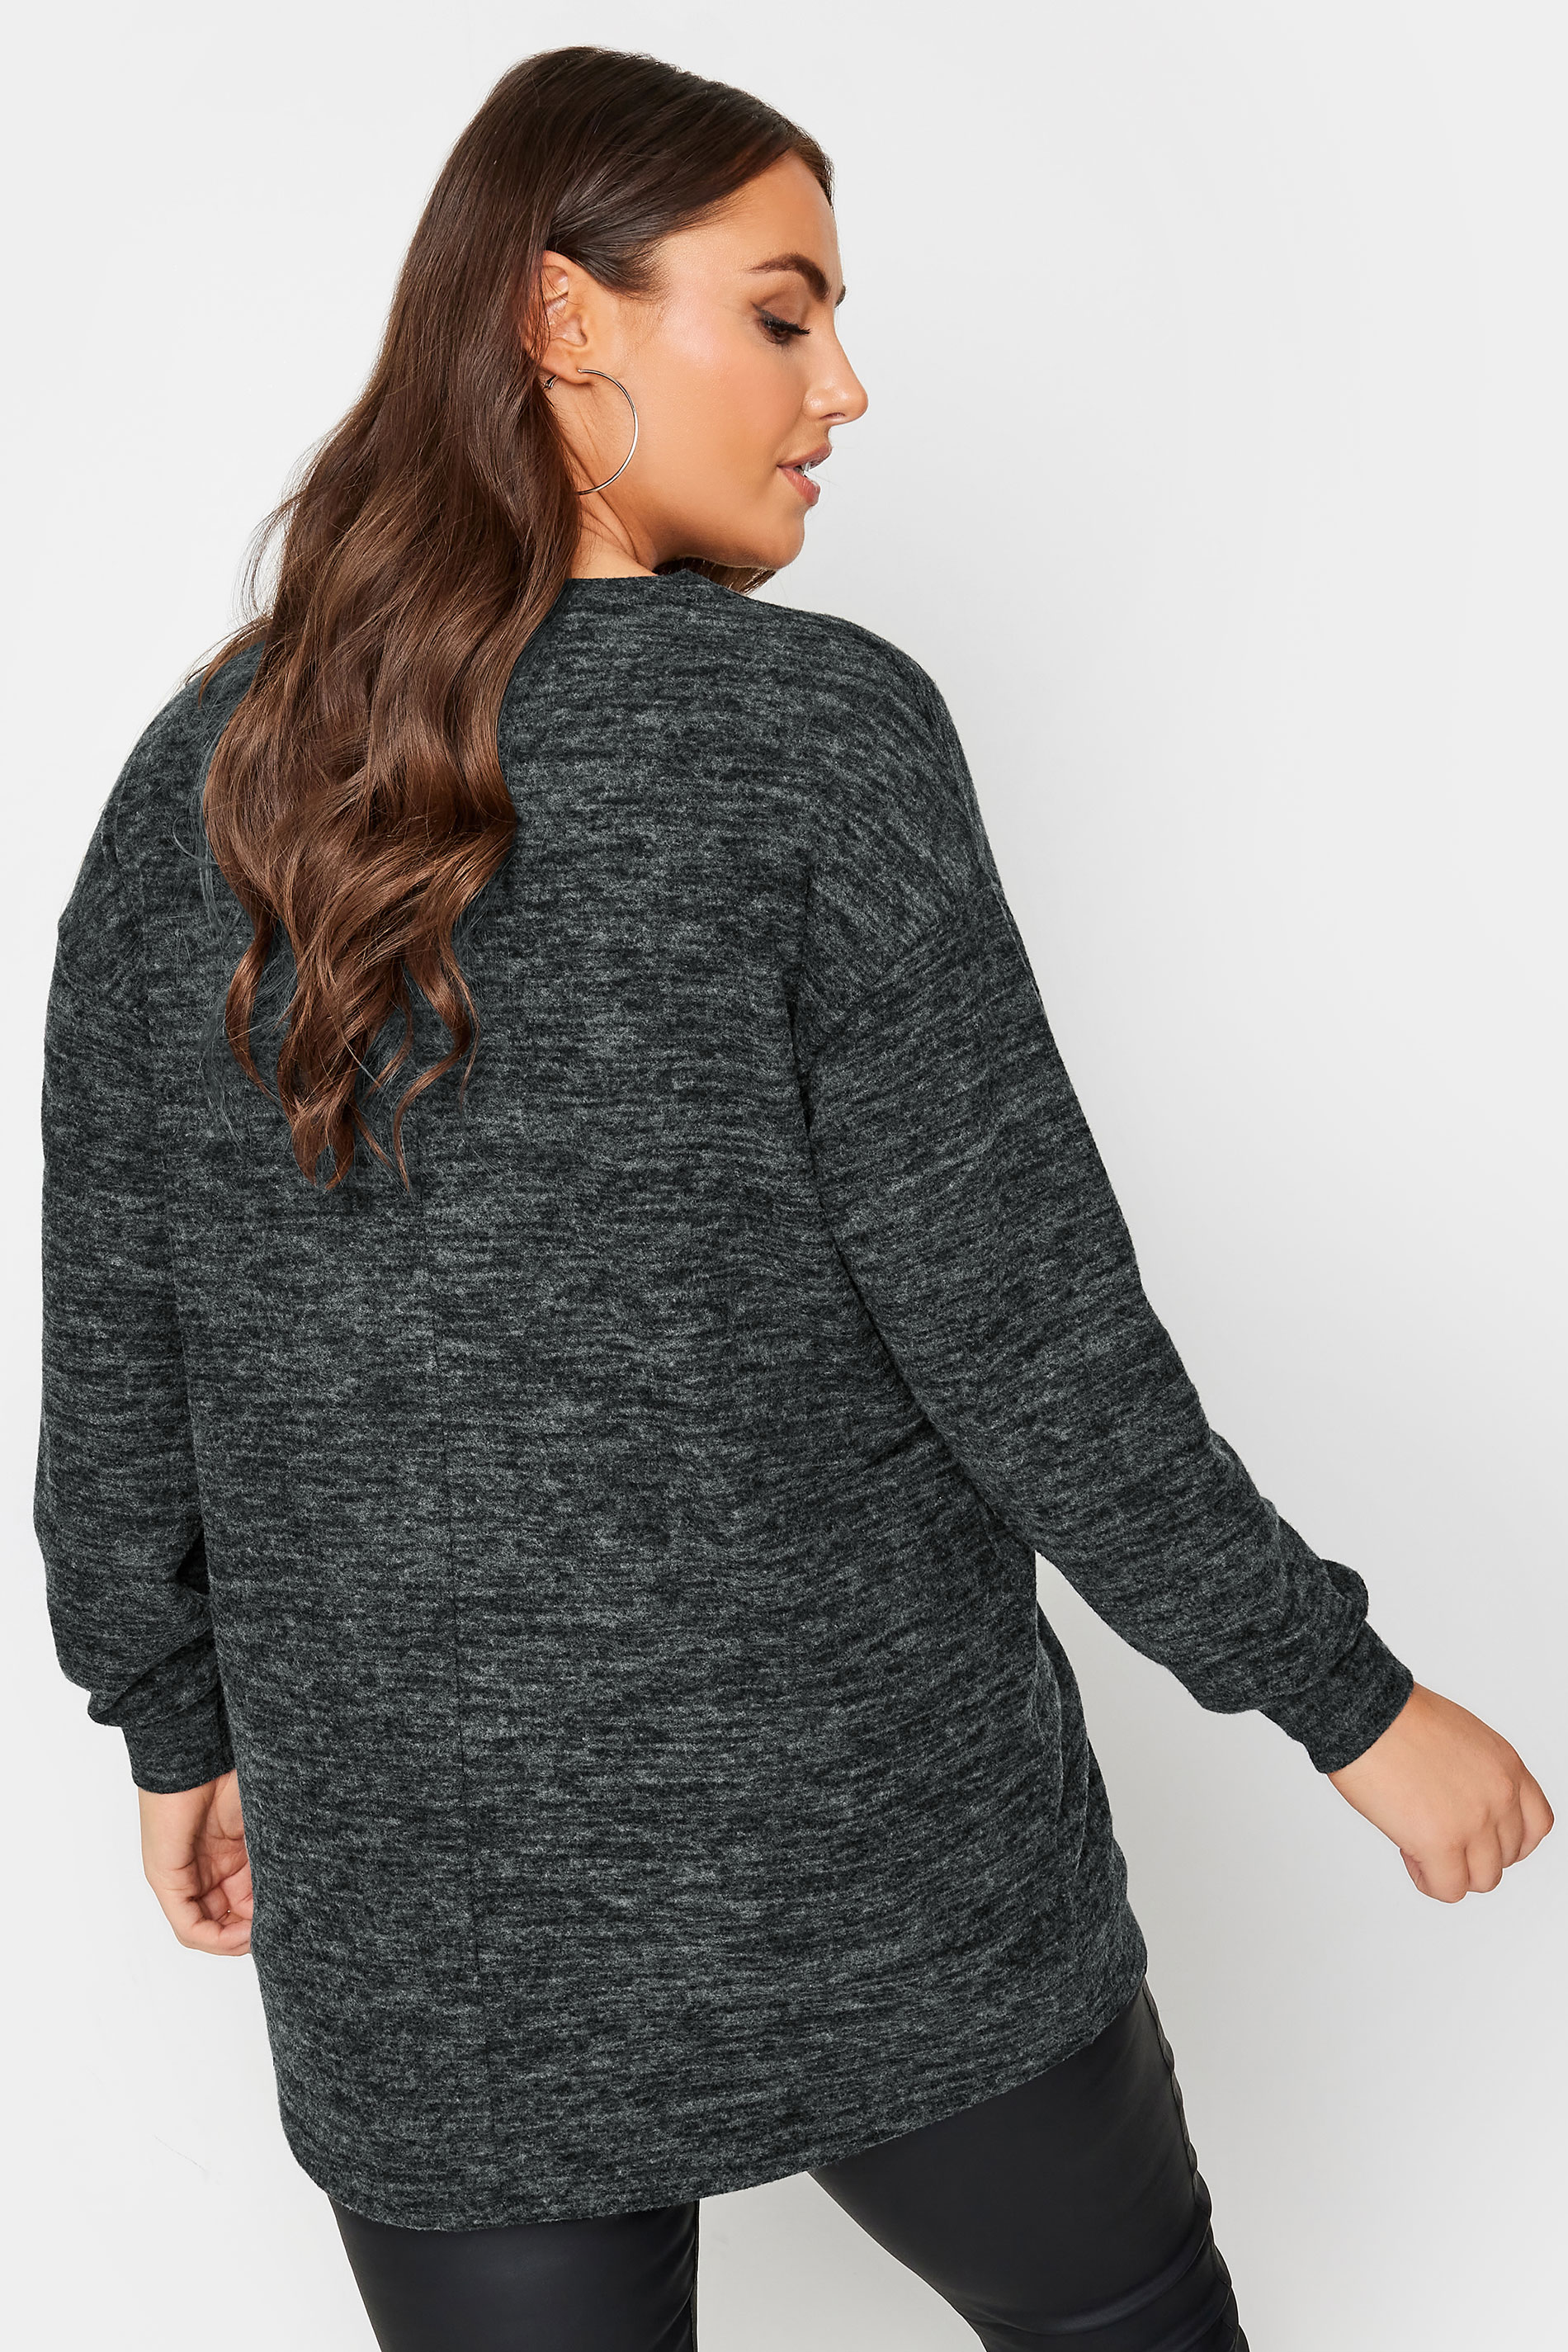 YOURS Plus Size Grey Pearl Embellished Jumper | Yours Clothing 3